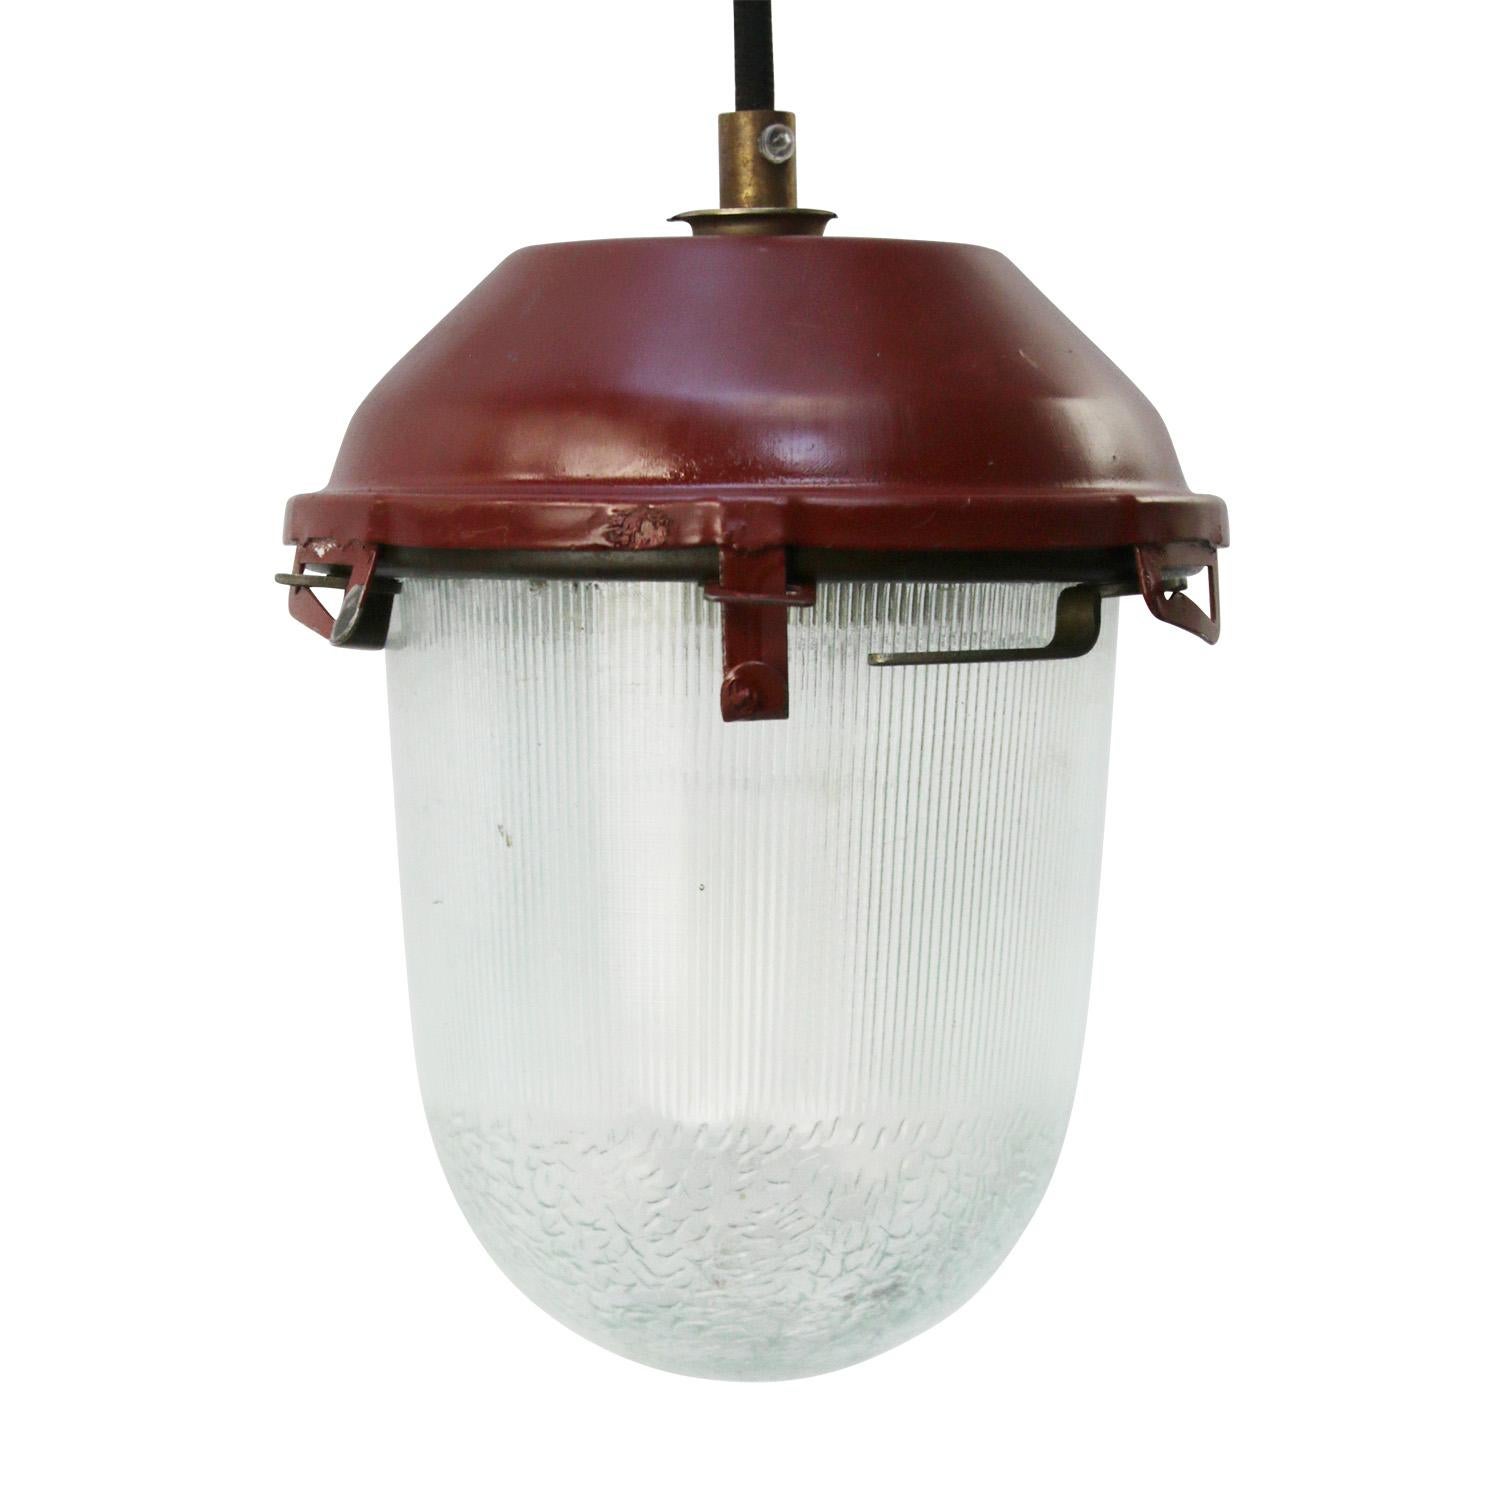 Small Industrial pendant light
Clear striped glass

Weight: 1.50 kg / 3.3 lb

Priced per individual item. All lamps have been made suitable by international standards for incandescent light bulbs, energy-efficient and LED bulbs. E26/E27 bulb